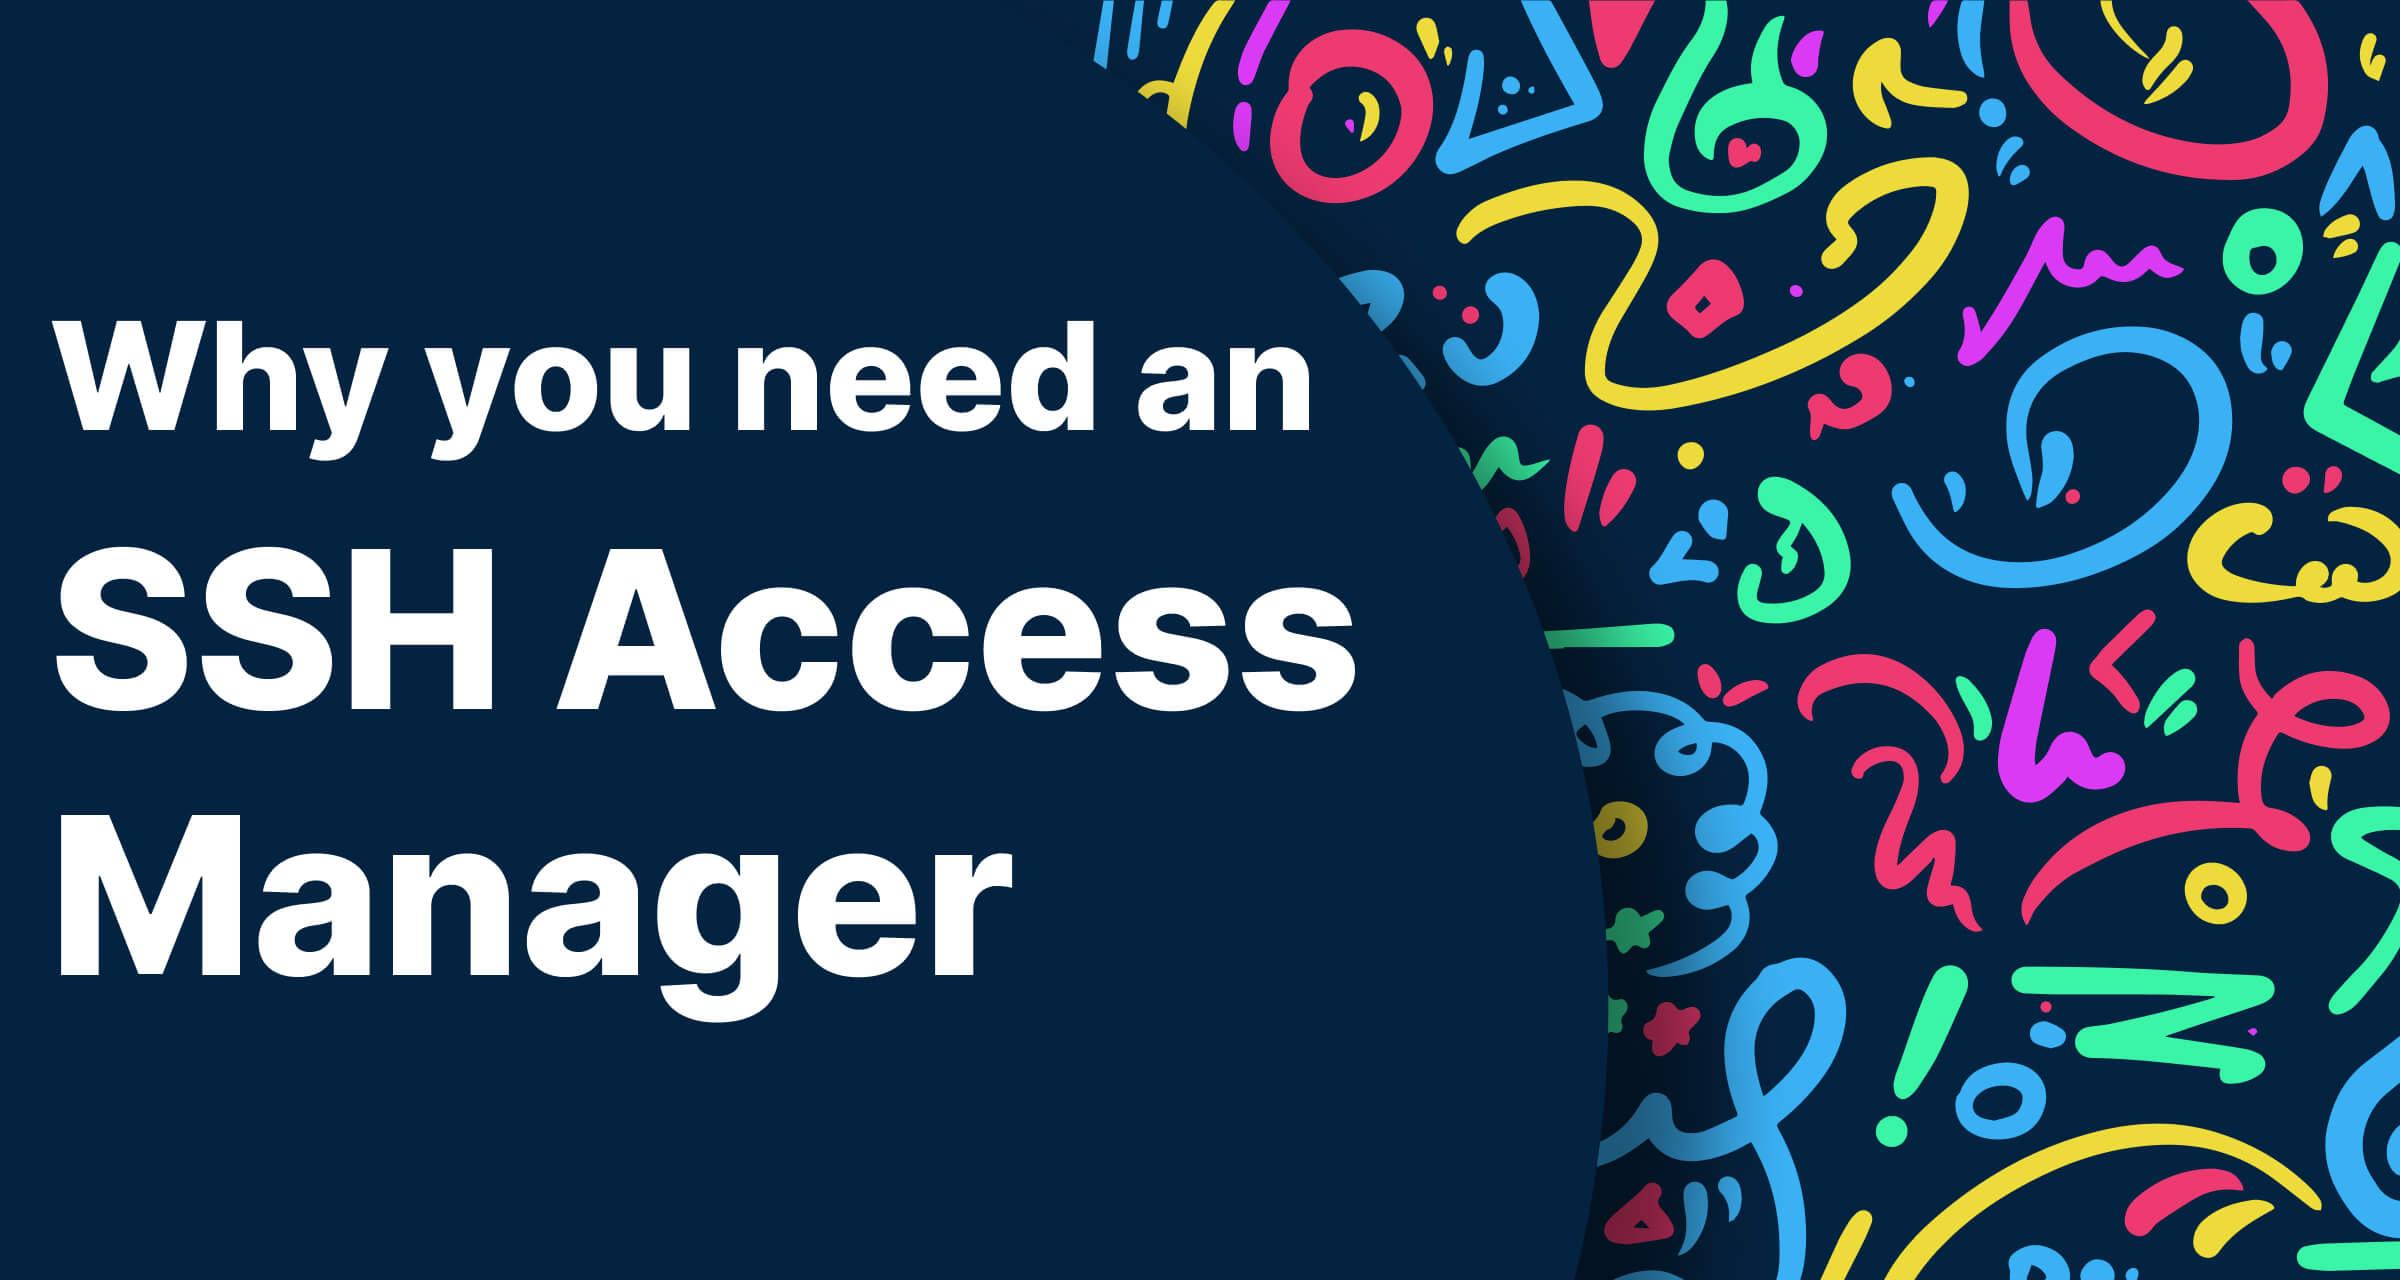 Why you need an SSH Access Manager